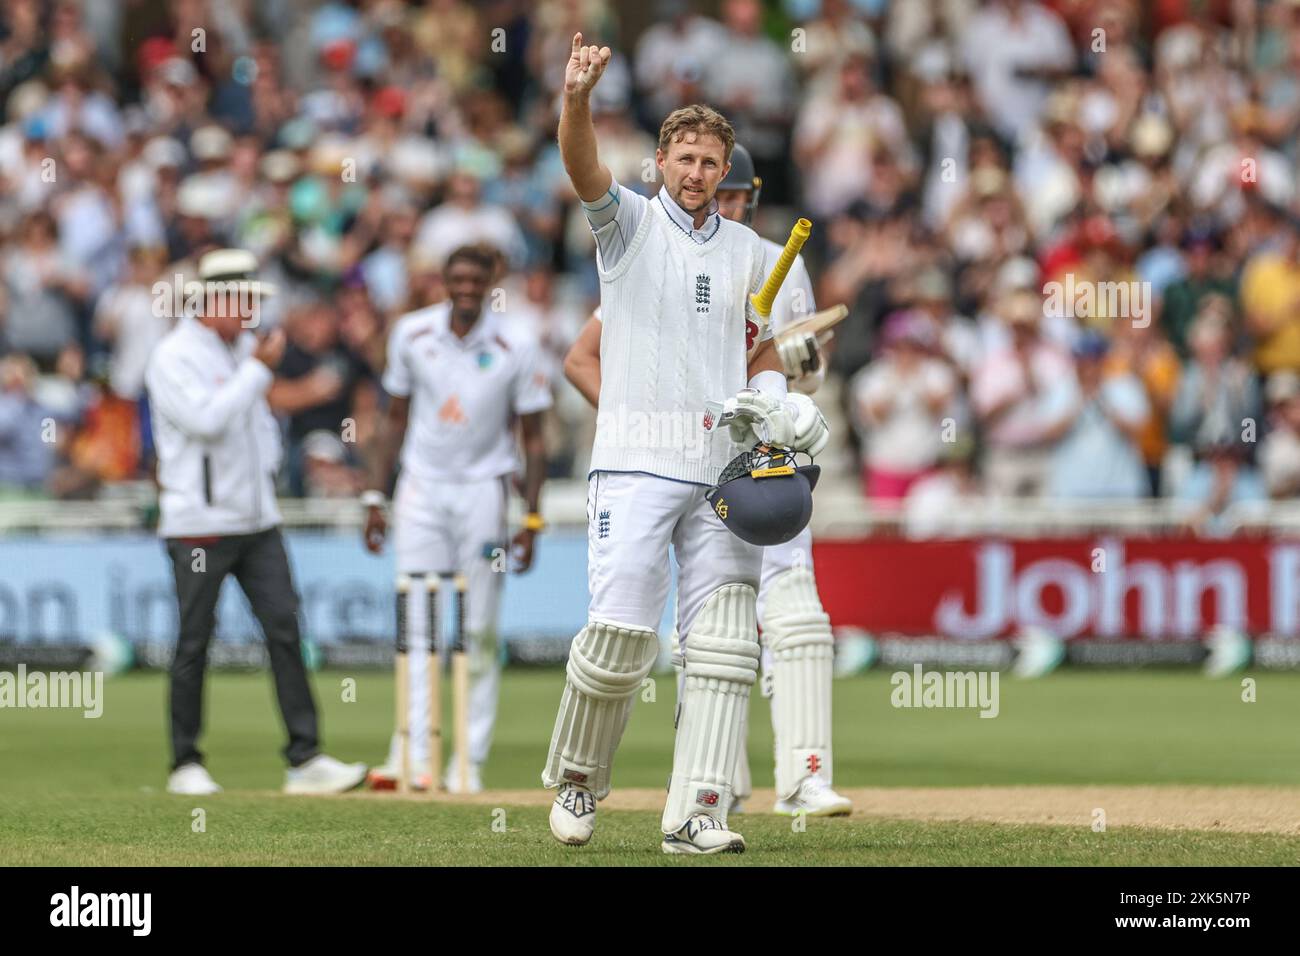 Joe Root of England celebrates a century (100 runs) during the Rothesay Test Match day four match England vs West Indies at Trent Bridge, Nottingham, United Kingdom, 21st July 2024  (Photo by Mark Cosgrove/News Images) Stock Photo